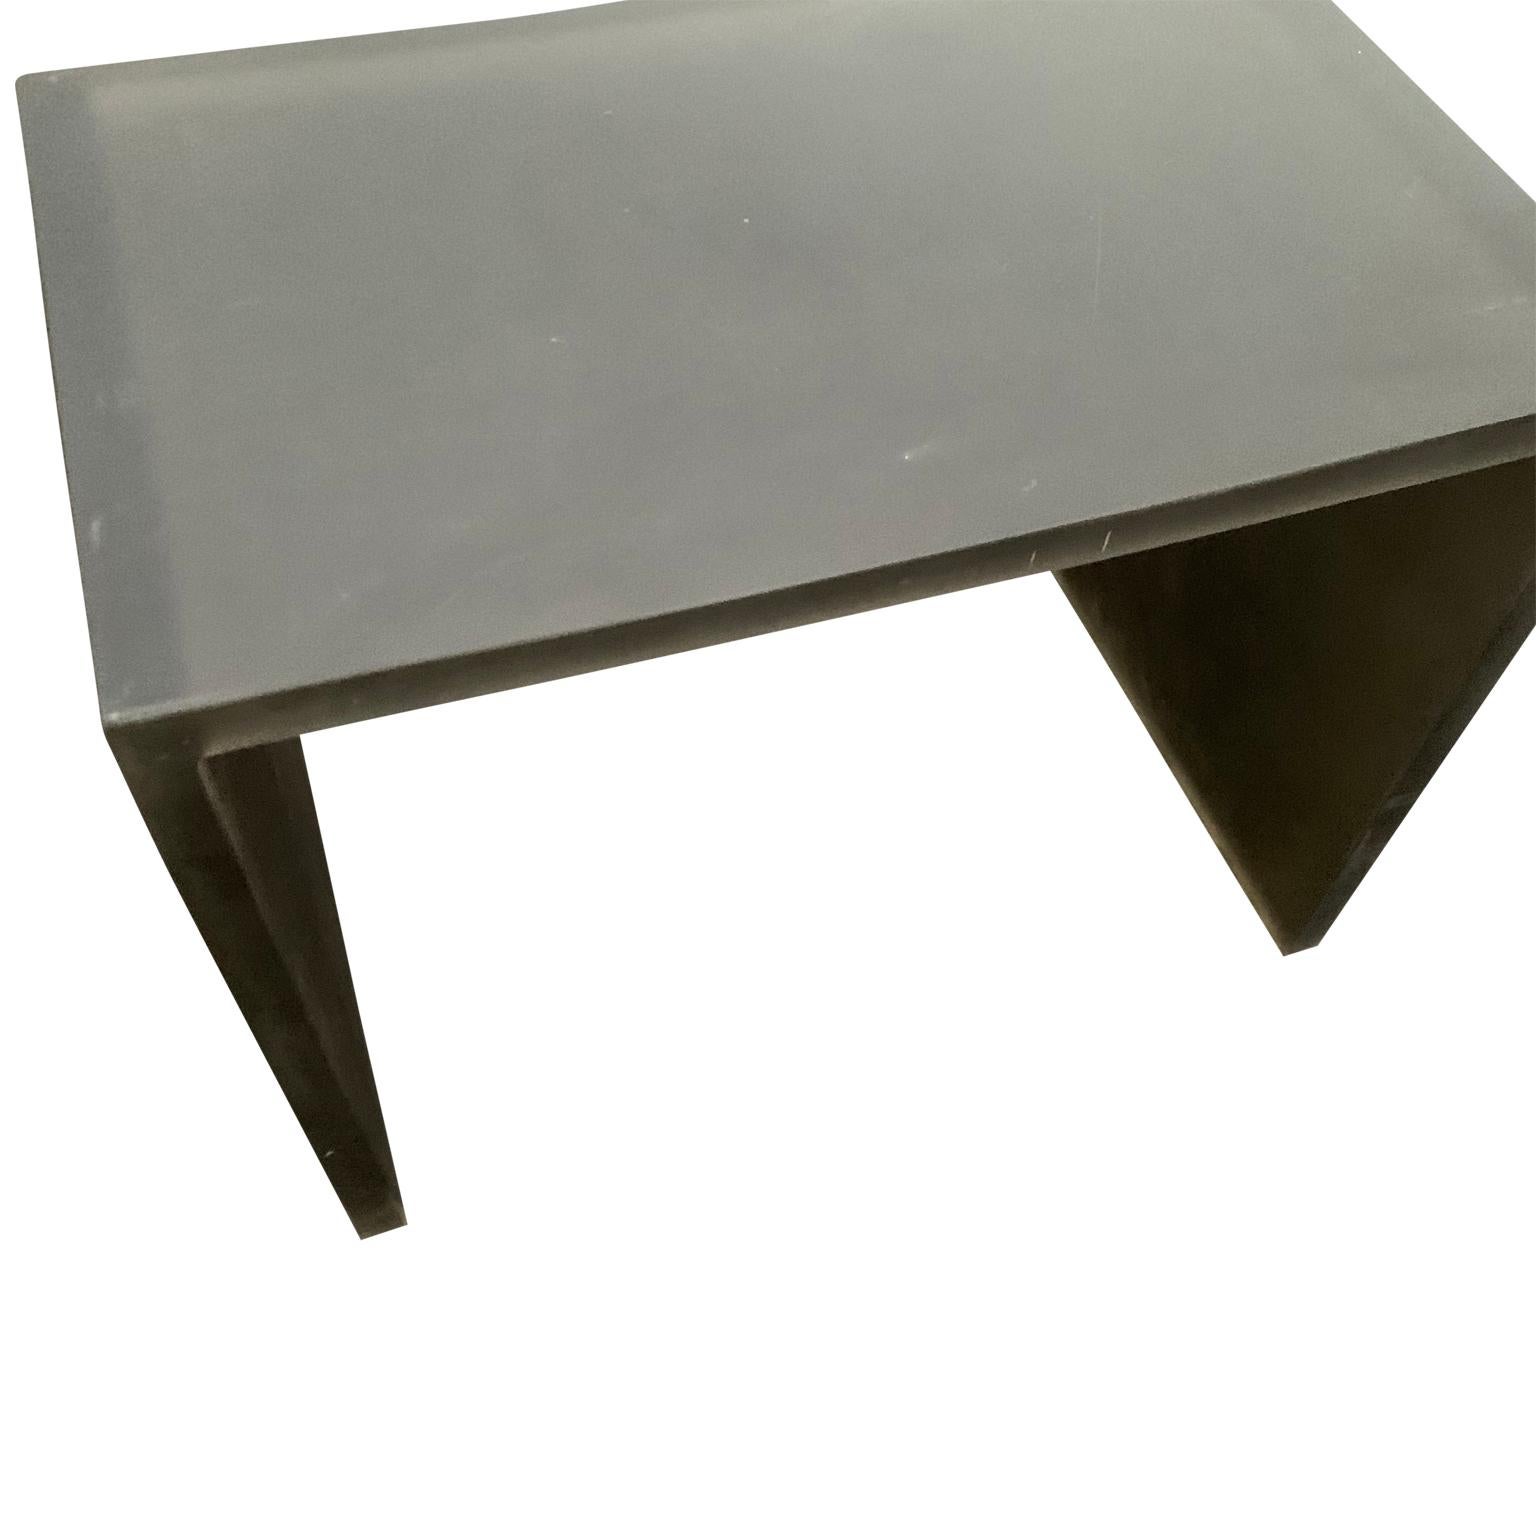 20th Century Pair of Mid-Century Modern Black Frosted Lucite Side Tables or Benches